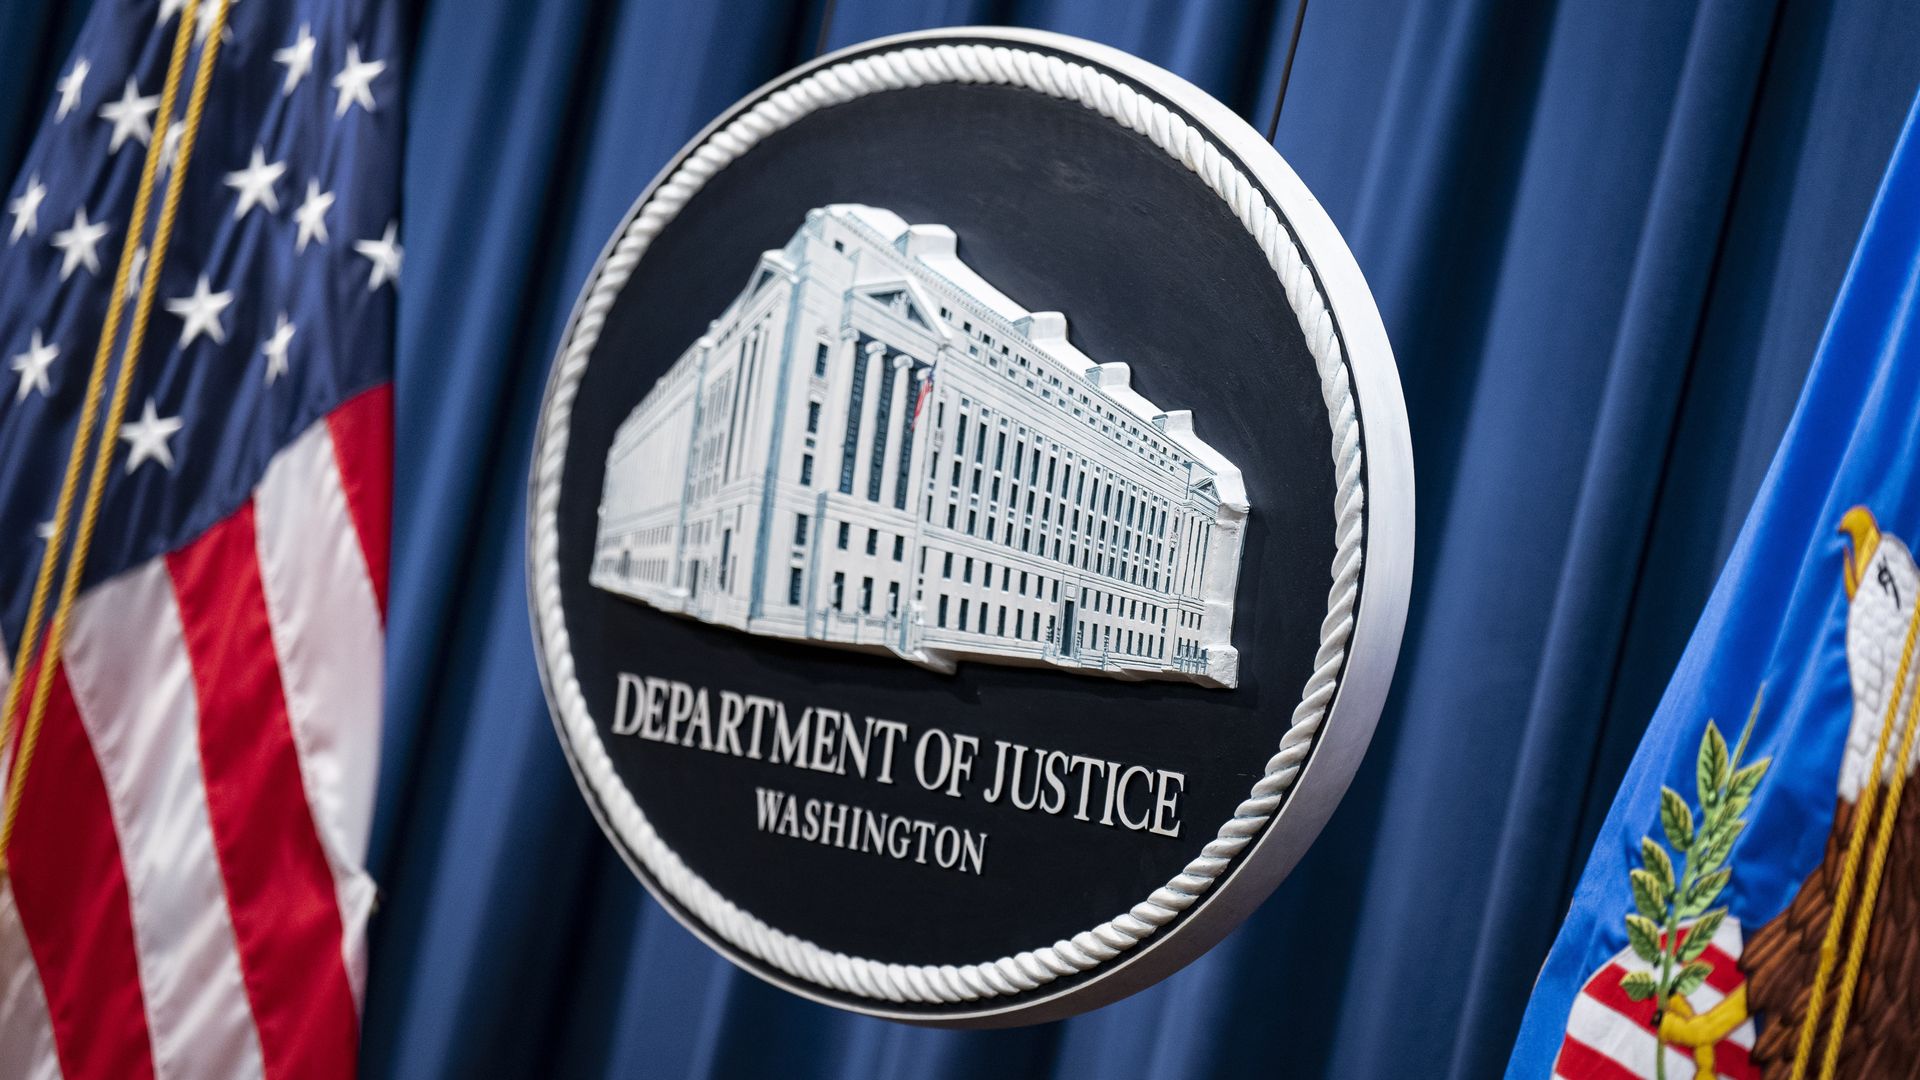 The Department of Justice seal. 